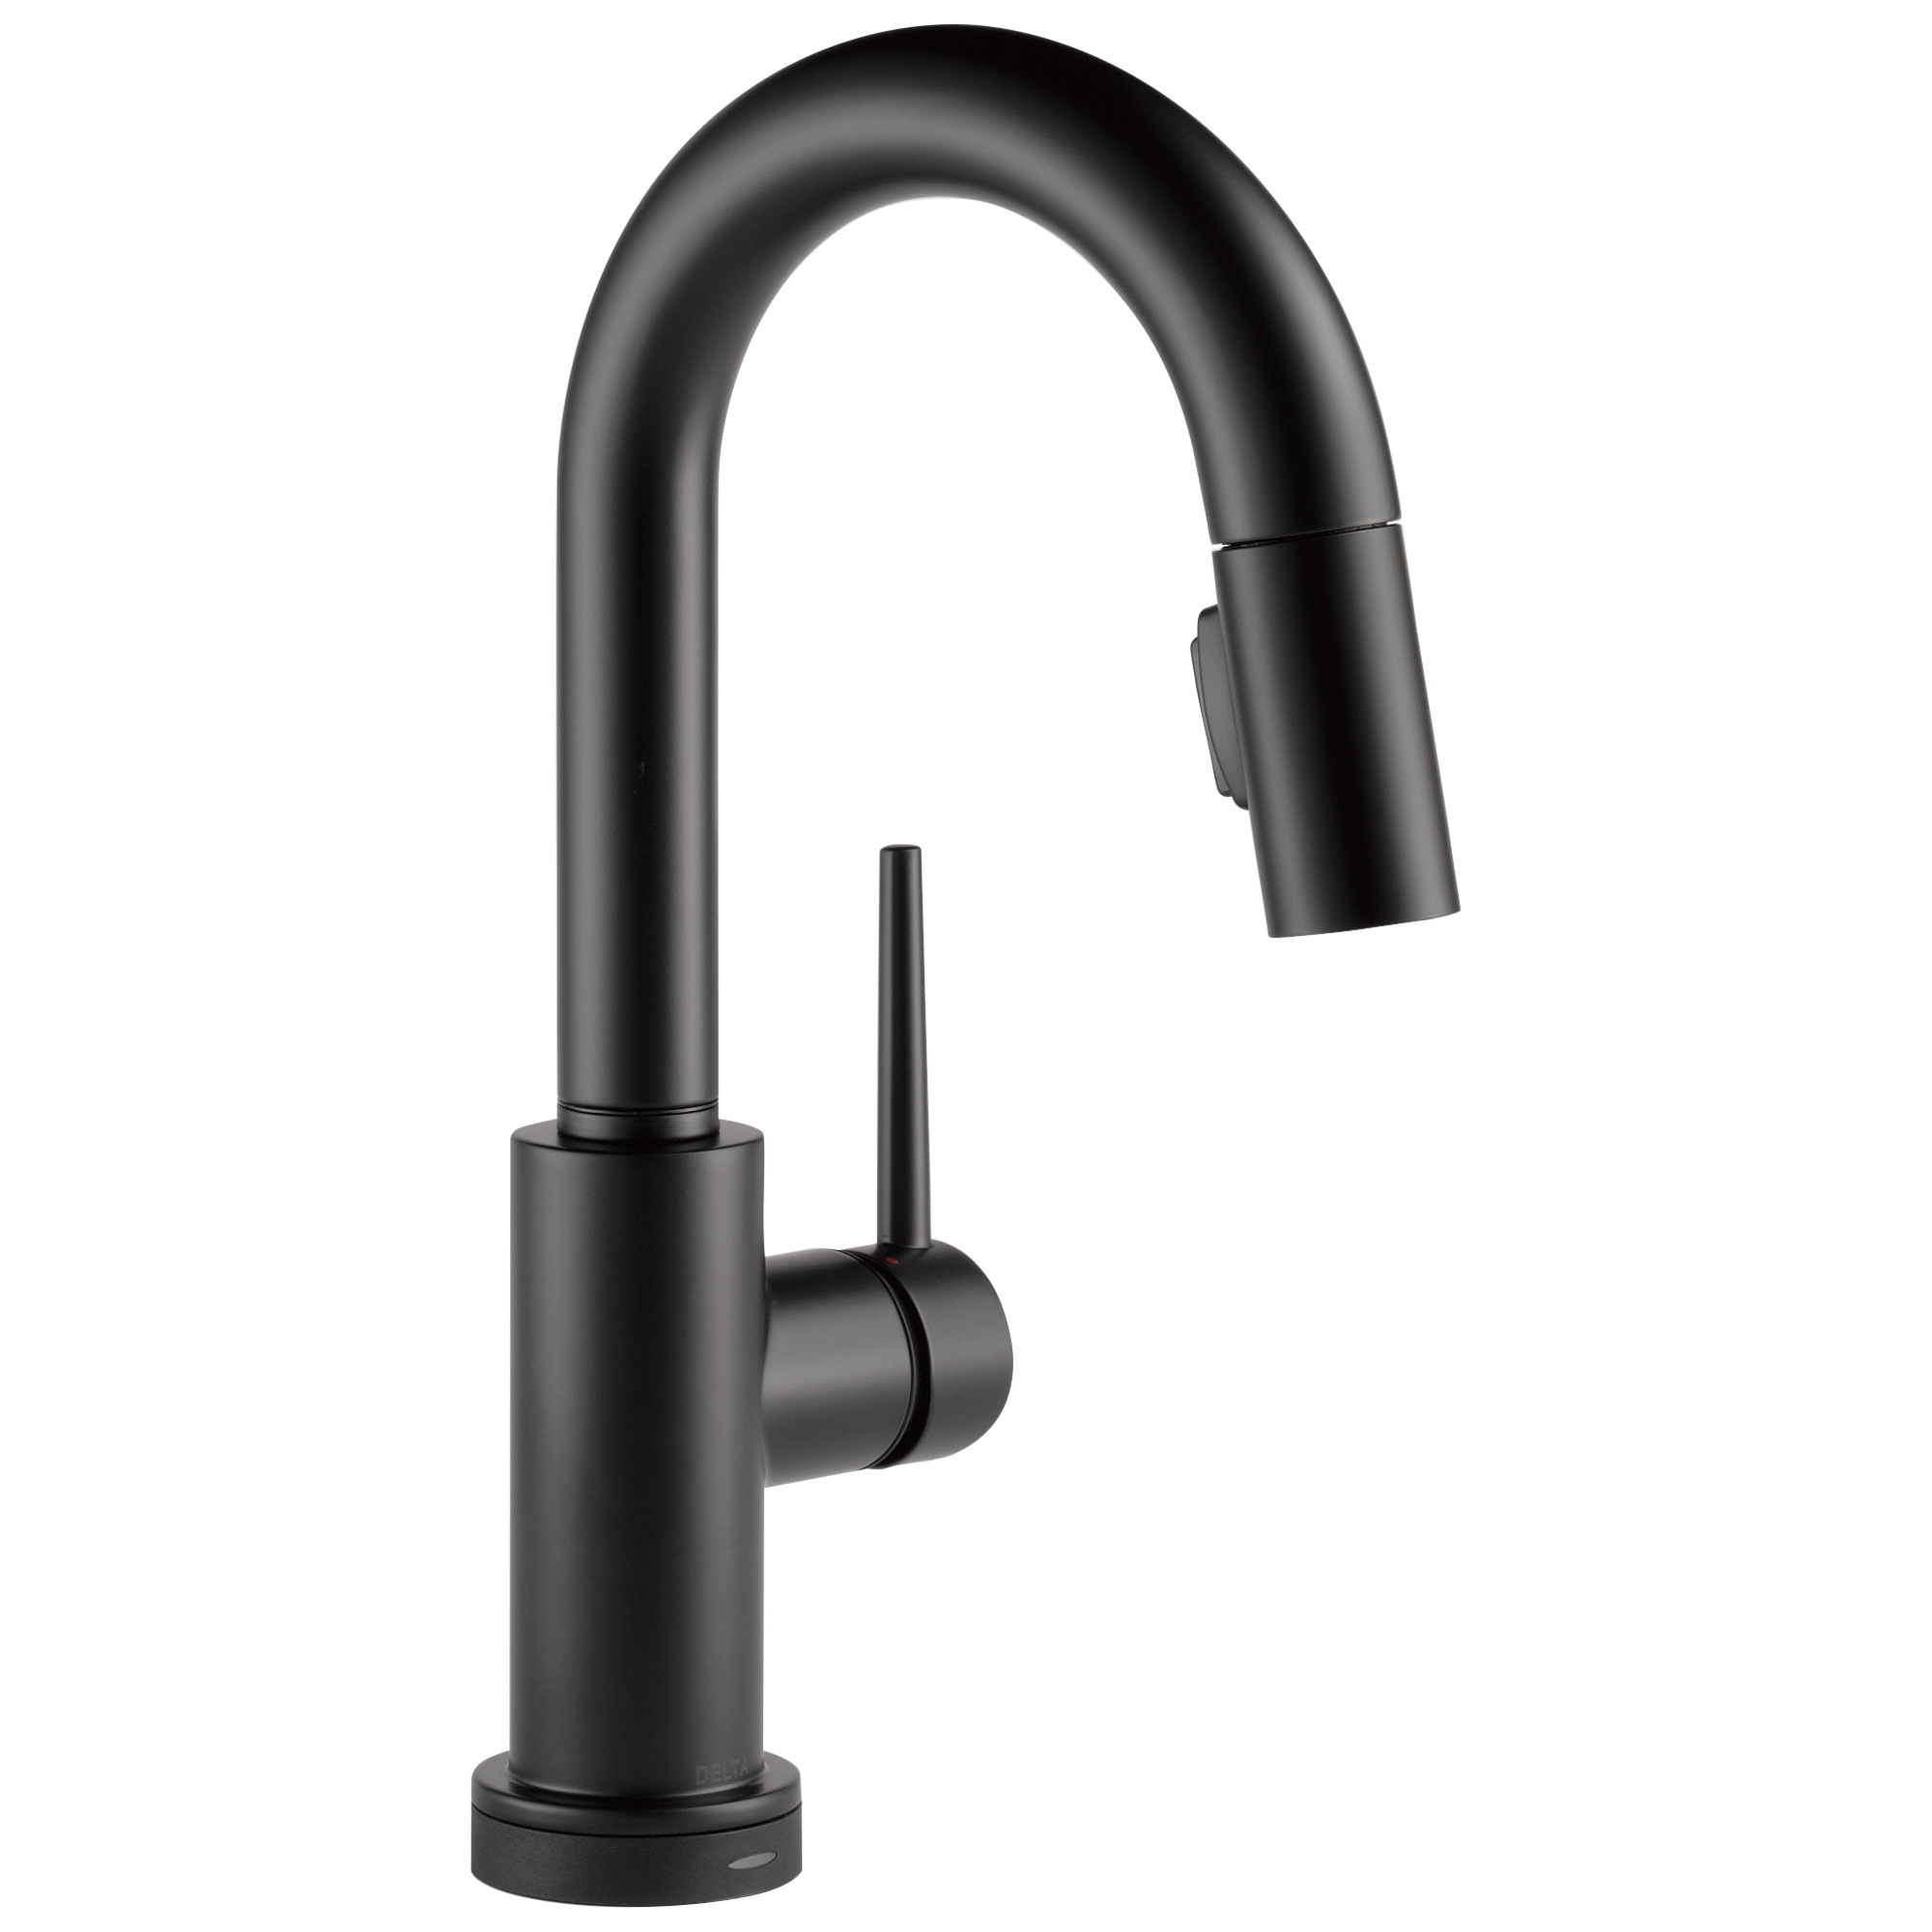 Delta Trinsic Single Handle Pull-Down Bar Faucet with TouchO Technology